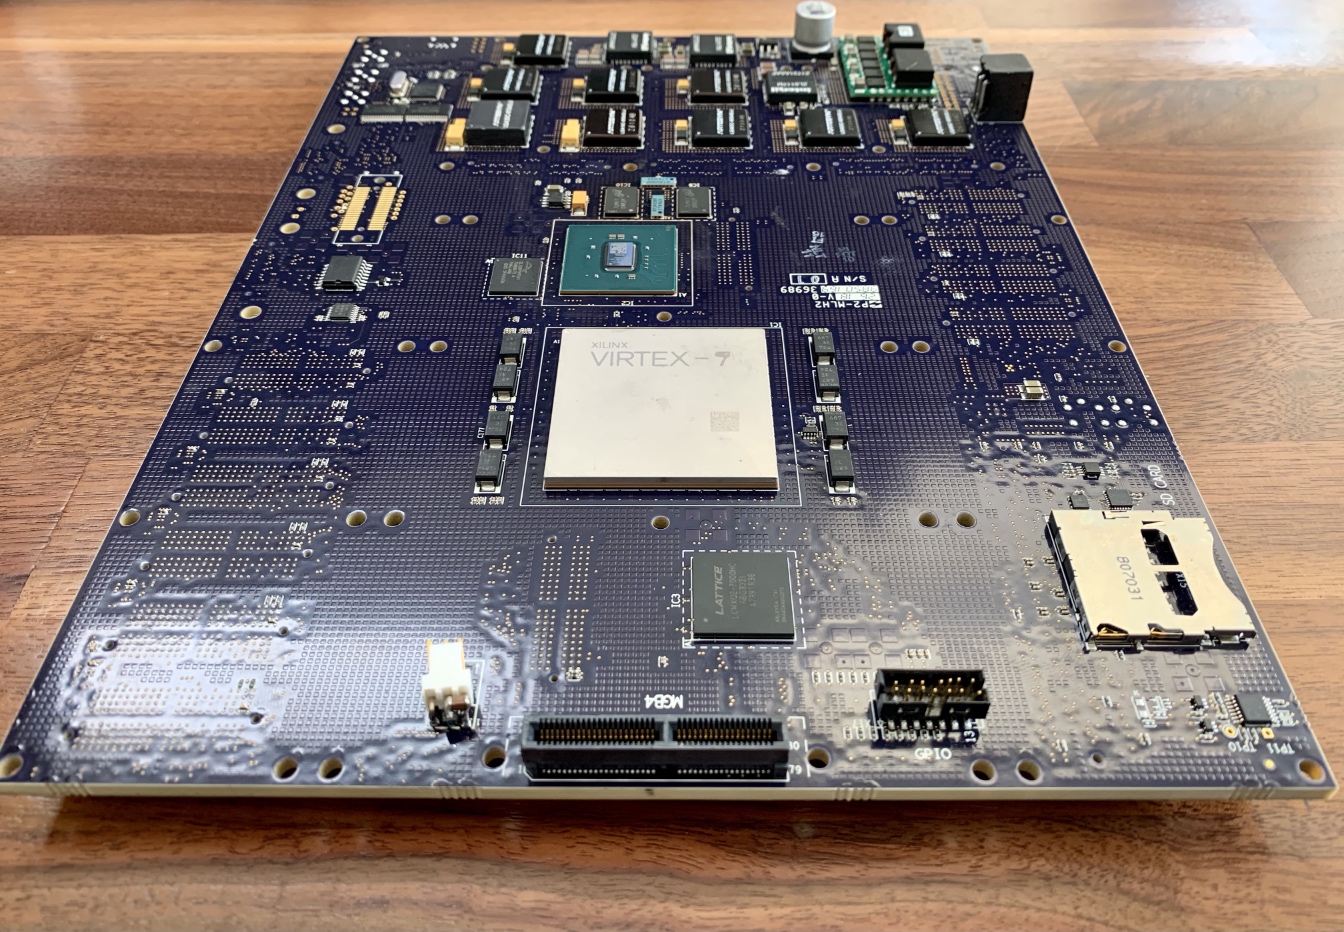 From eBay junk to JTAG on a gigantic FPGA board